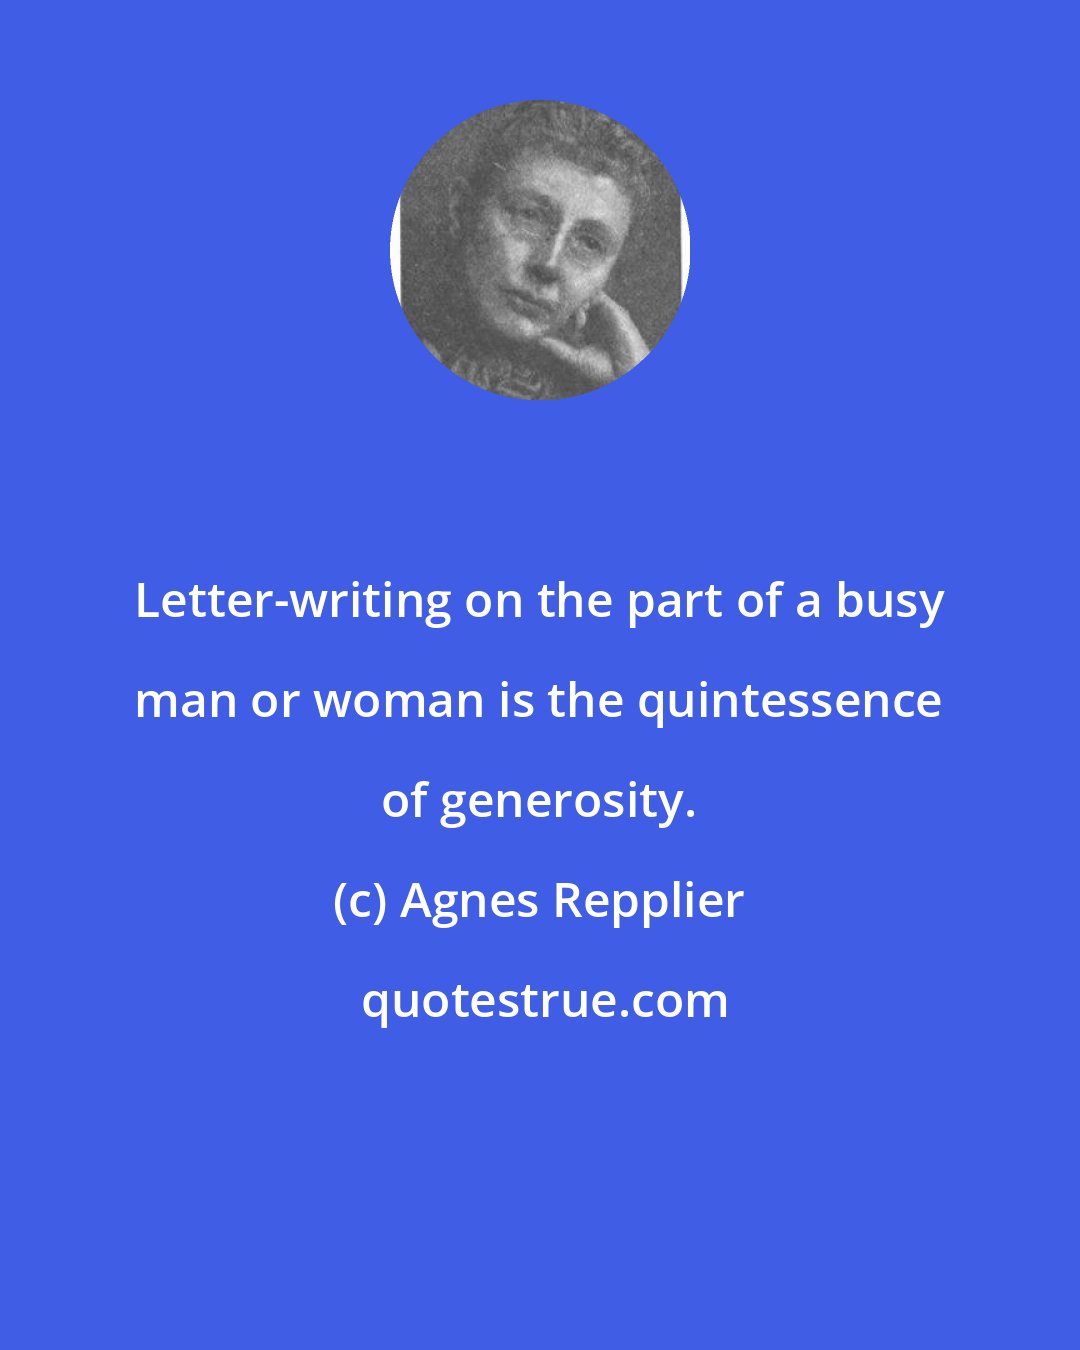 Agnes Repplier: Letter-writing on the part of a busy man or woman is the quintessence of generosity.